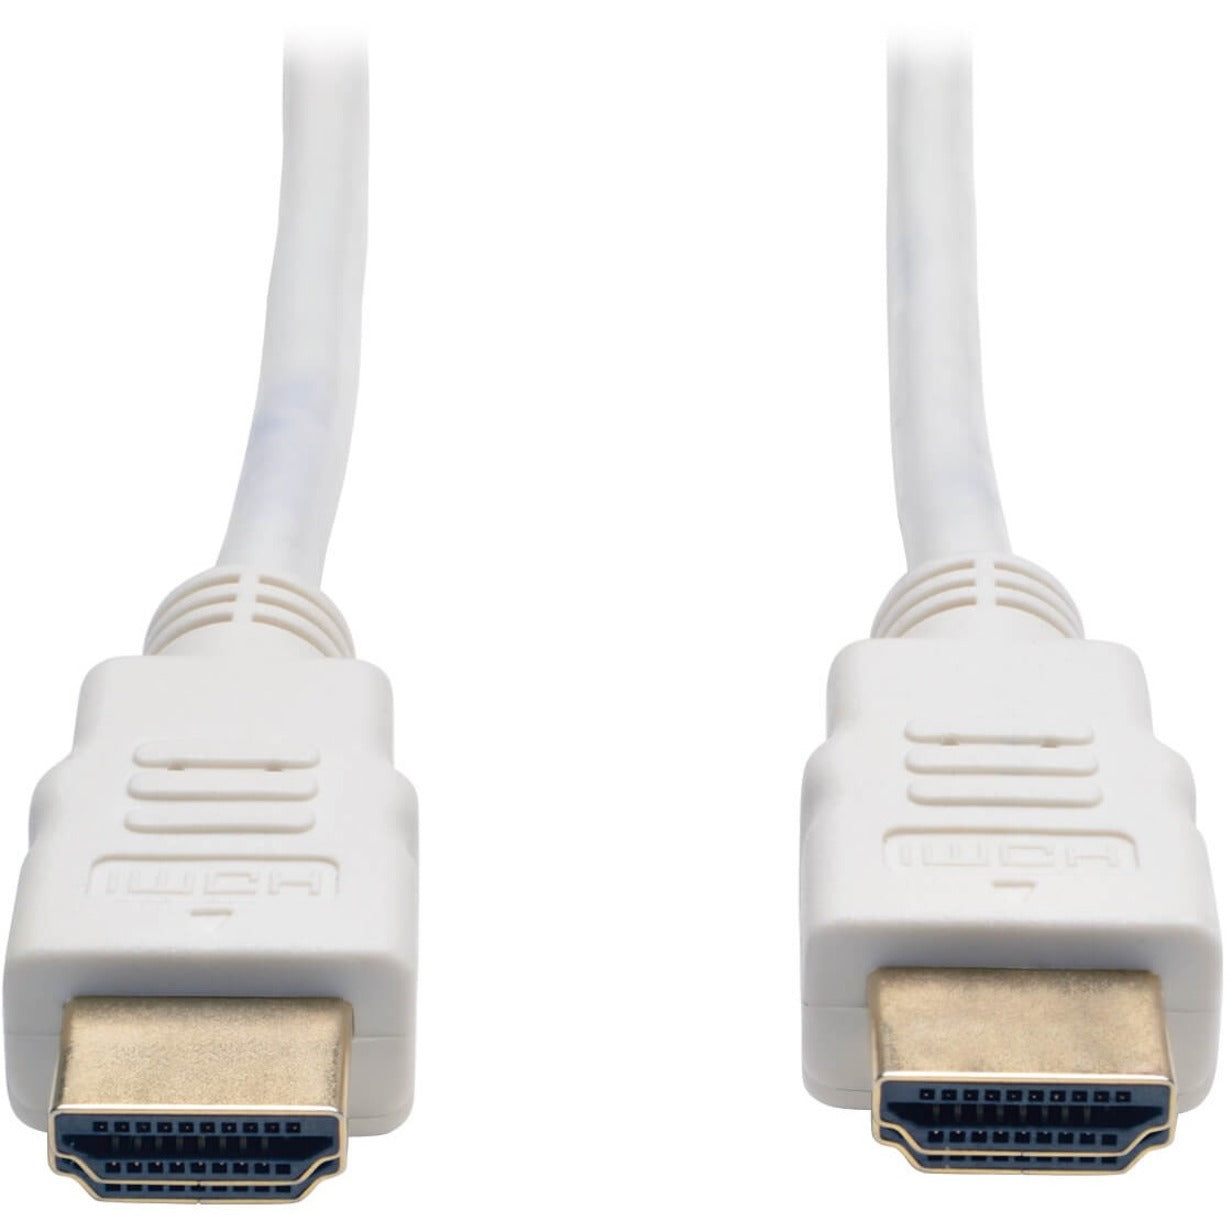 Tripp Lite P568-006-WH High Speed HDMI Cable, Digital Video with Audio, White, 6-ft